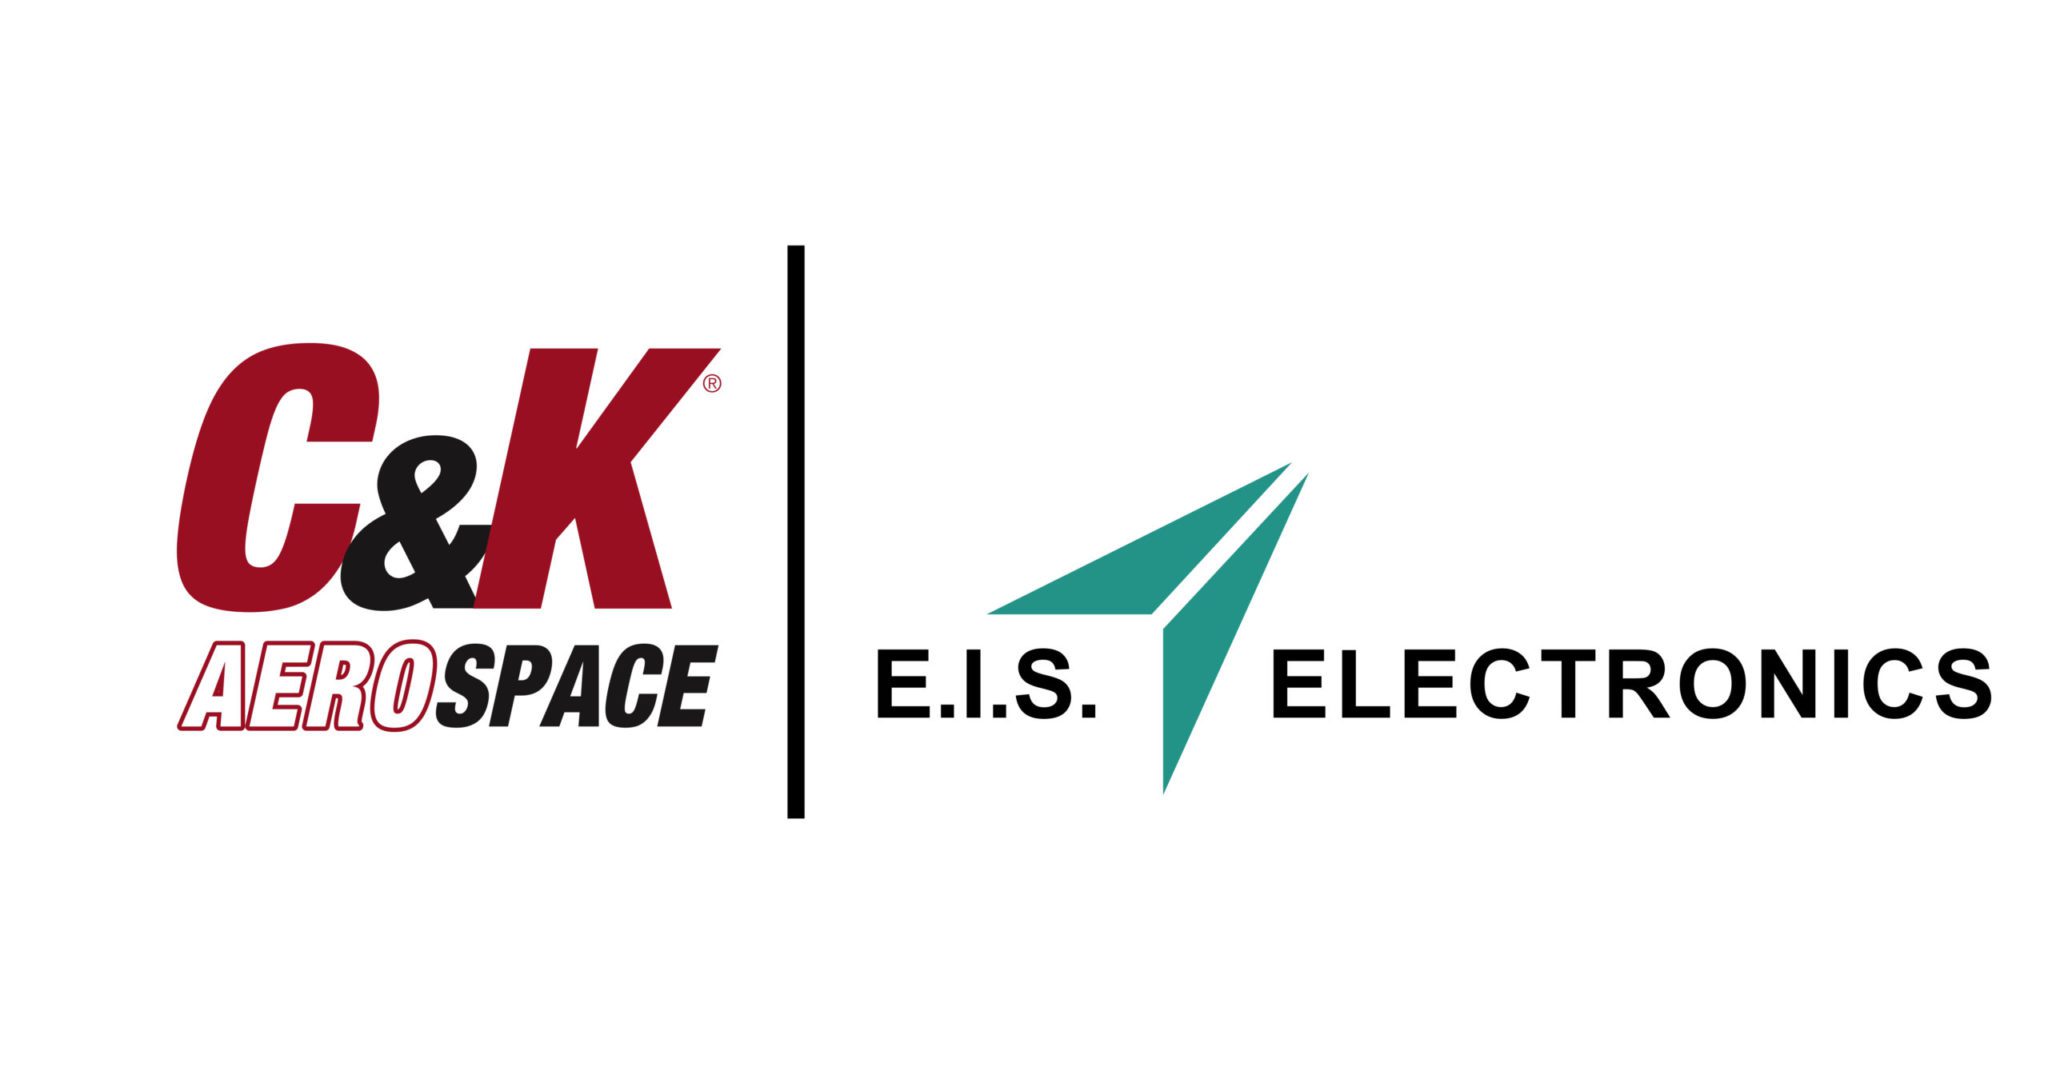 C&K to acquire EIS electronics 2021